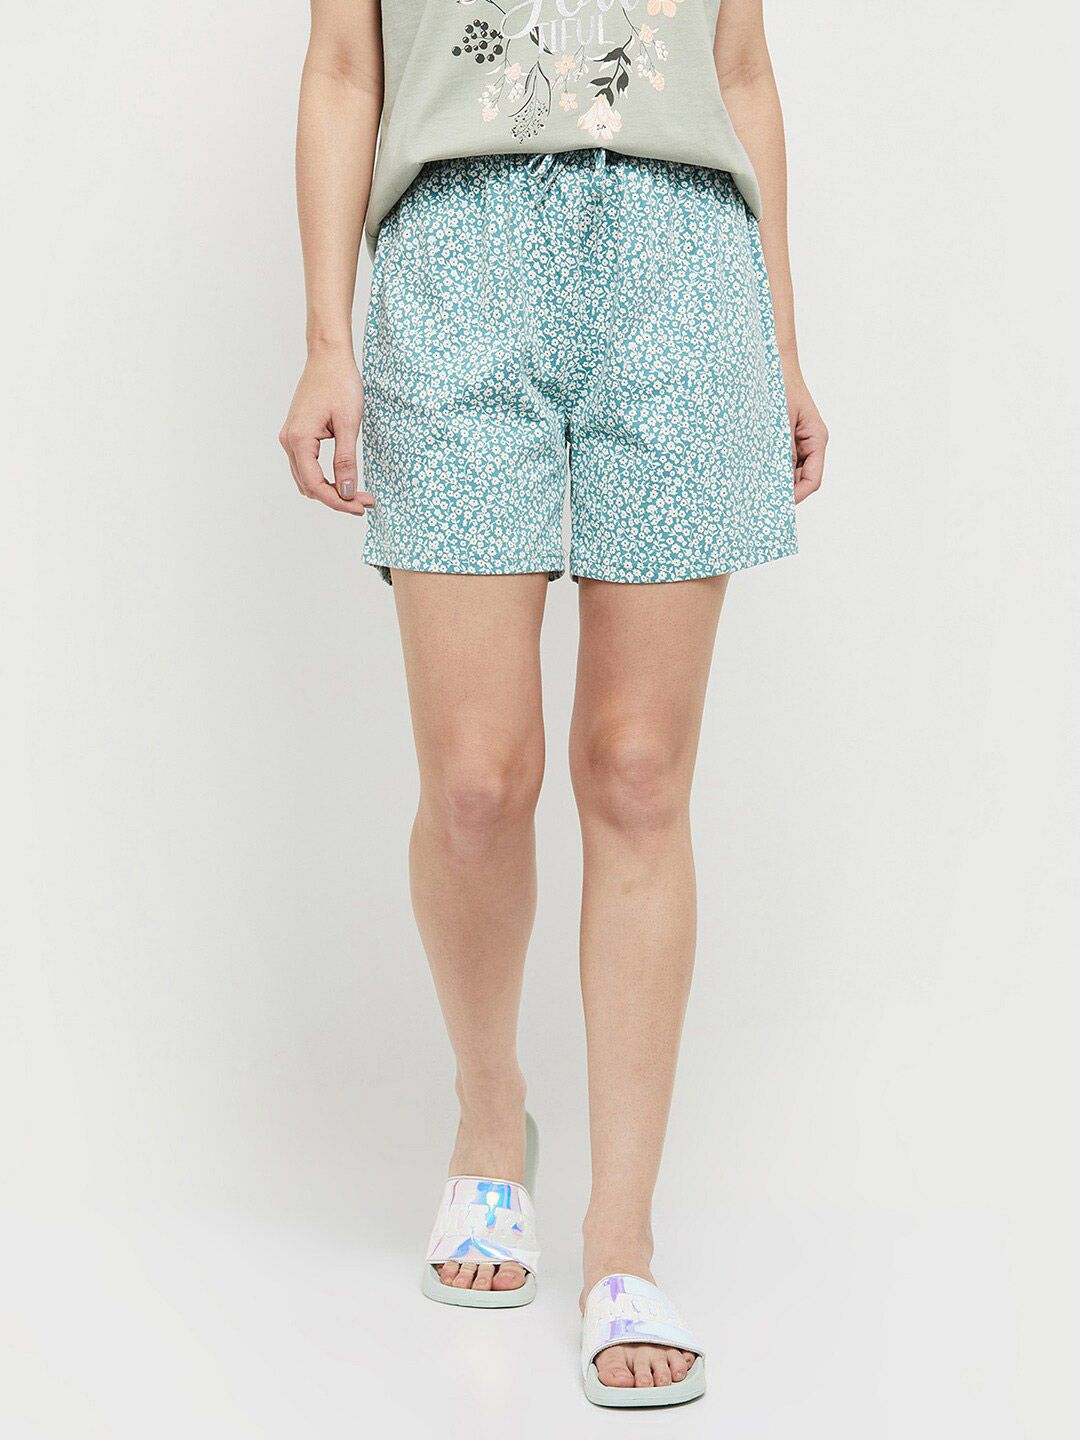 max Women Teal & White Printed Lounge Shorts Price in India